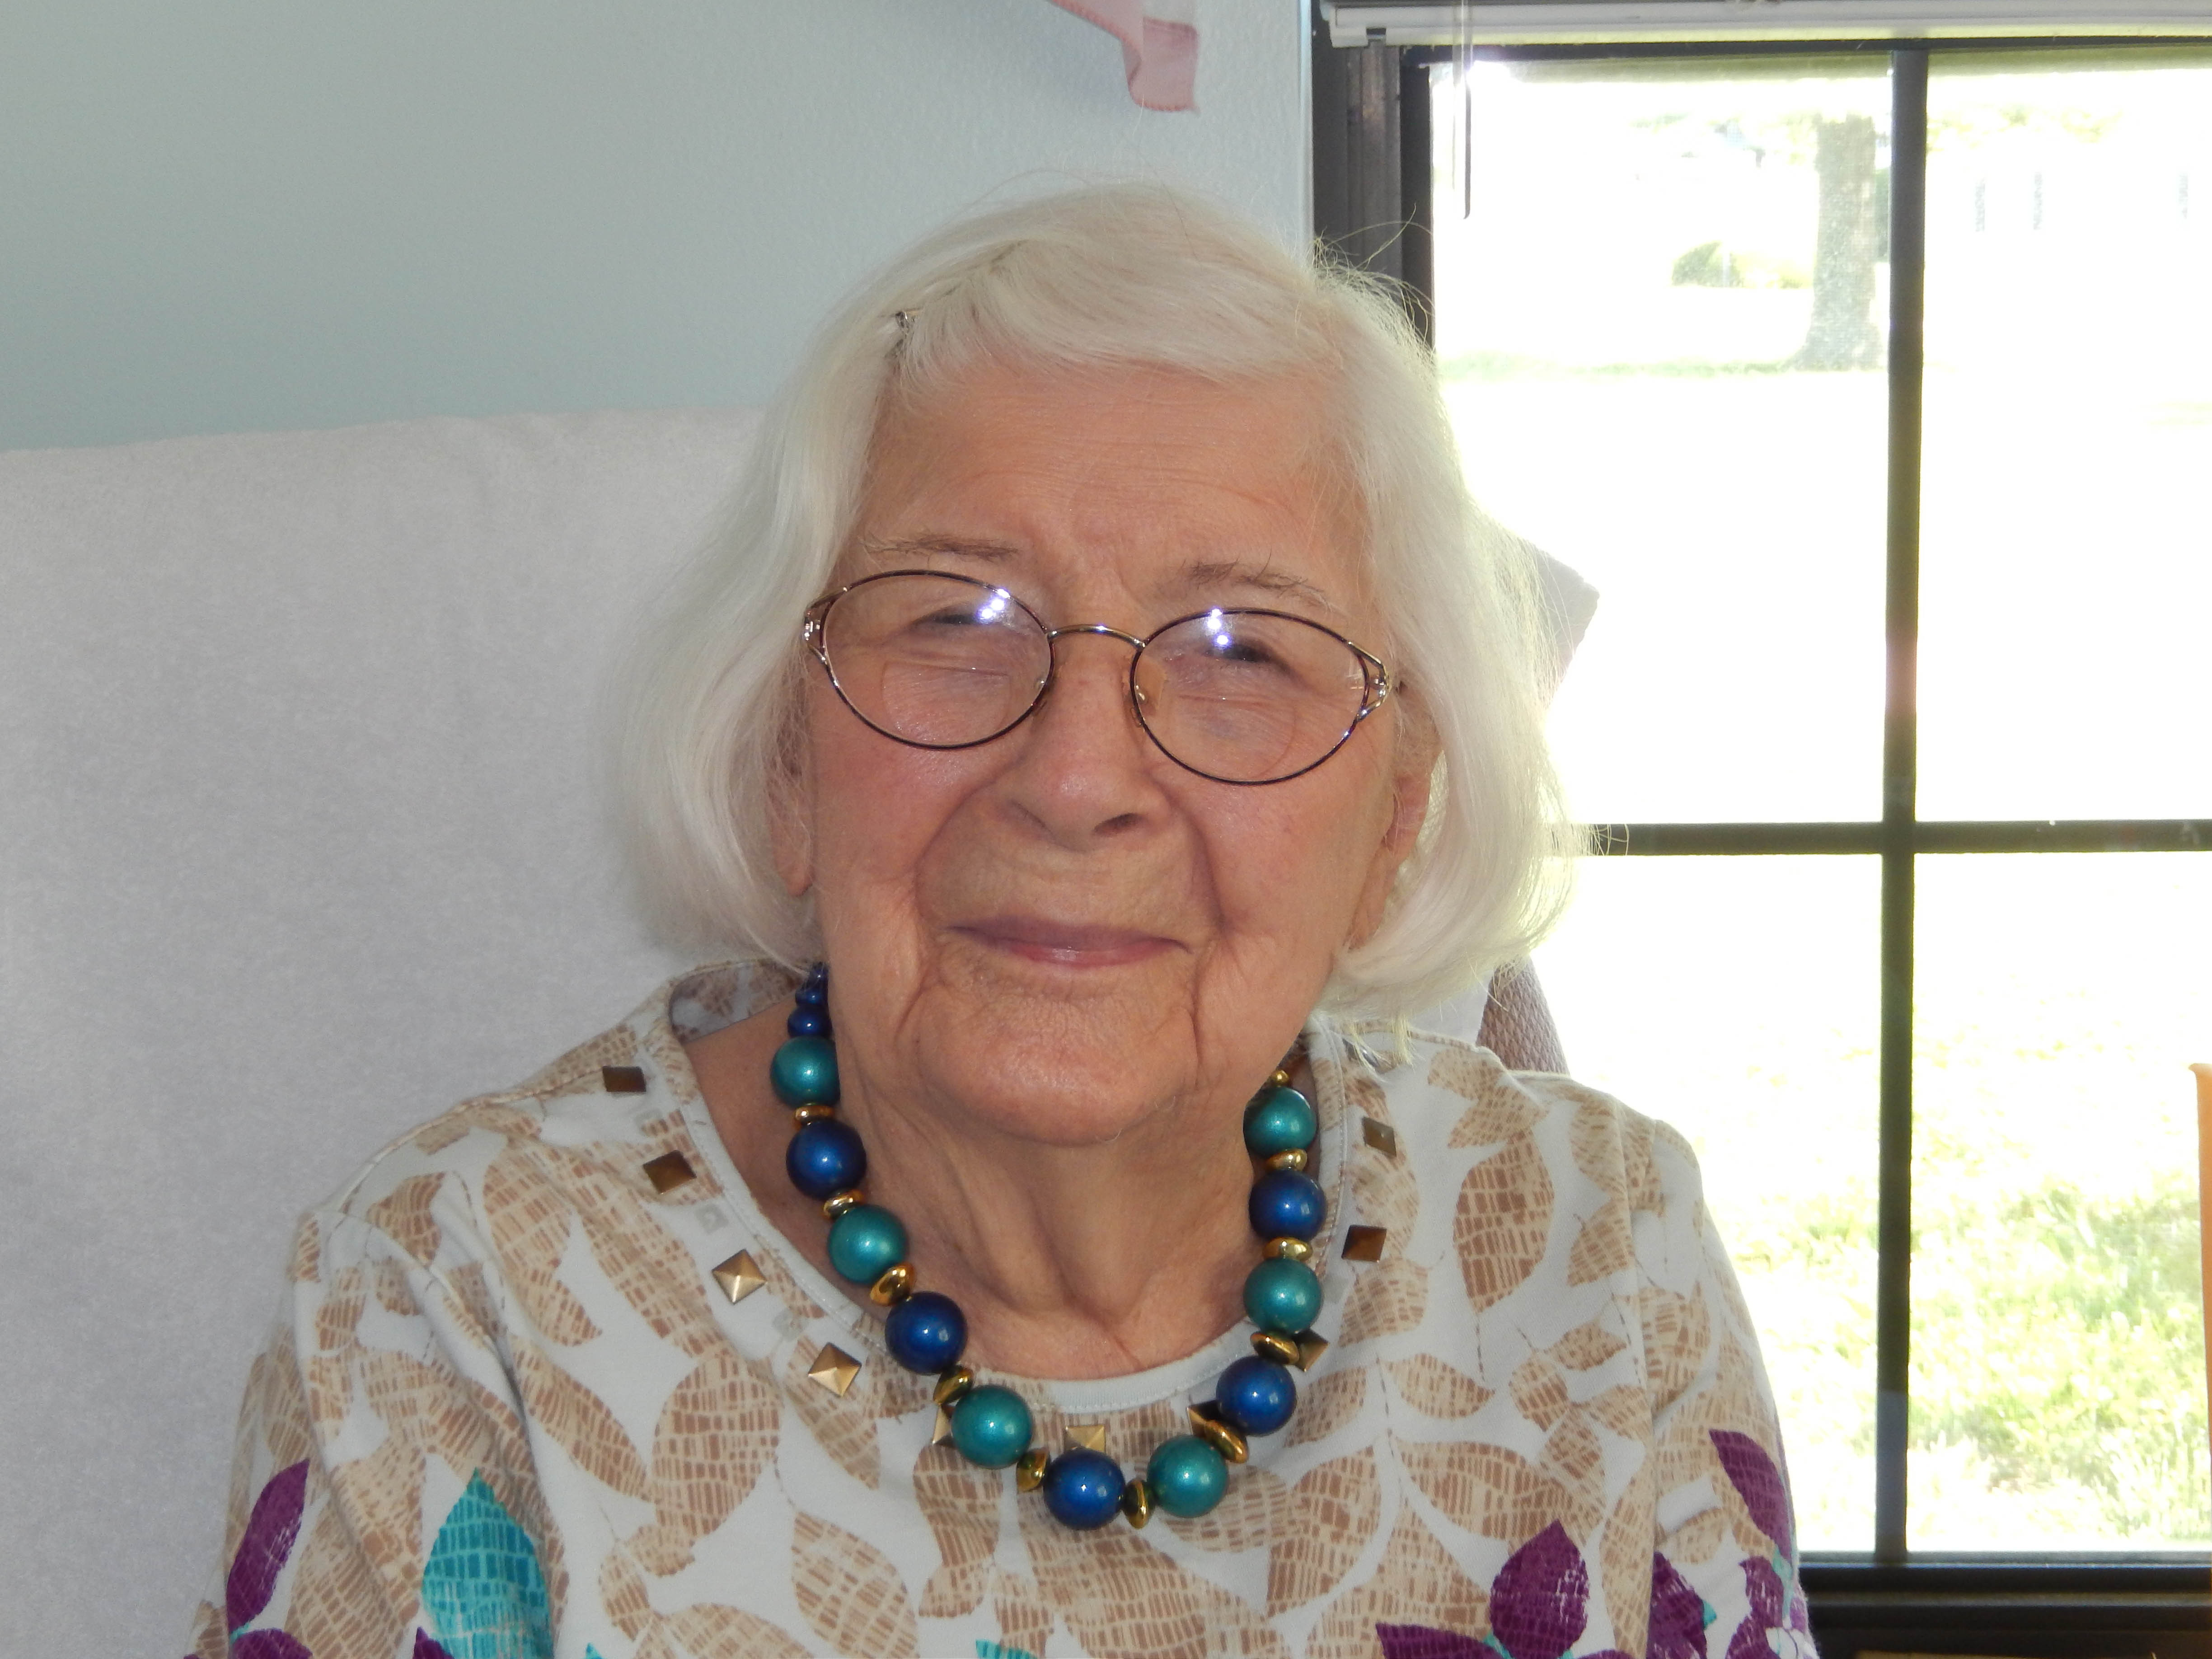 Oral History: Marge Warren, centenarian, by Suzanne Vining